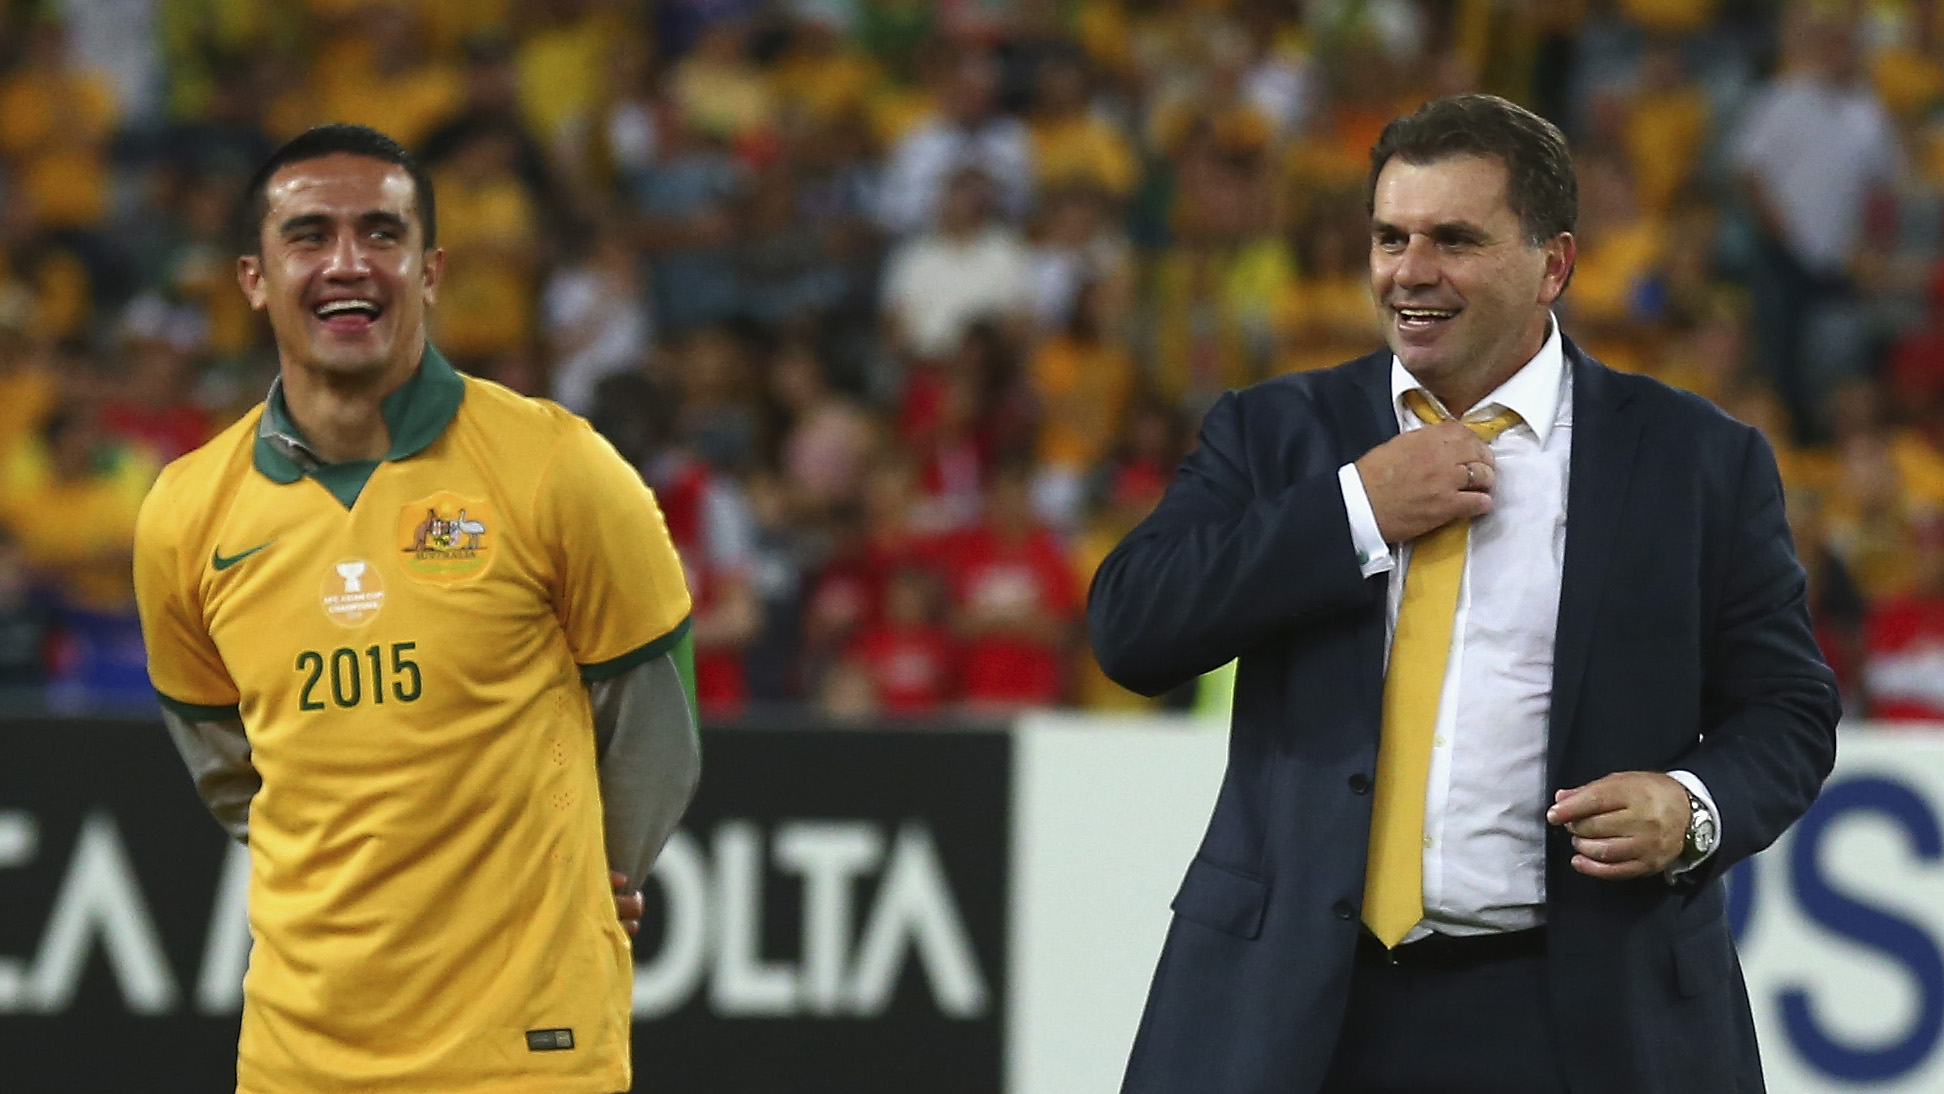 Ange Postecoglou shares a moment with Tim Cahill after winning the 2015 AFC Asian Cup